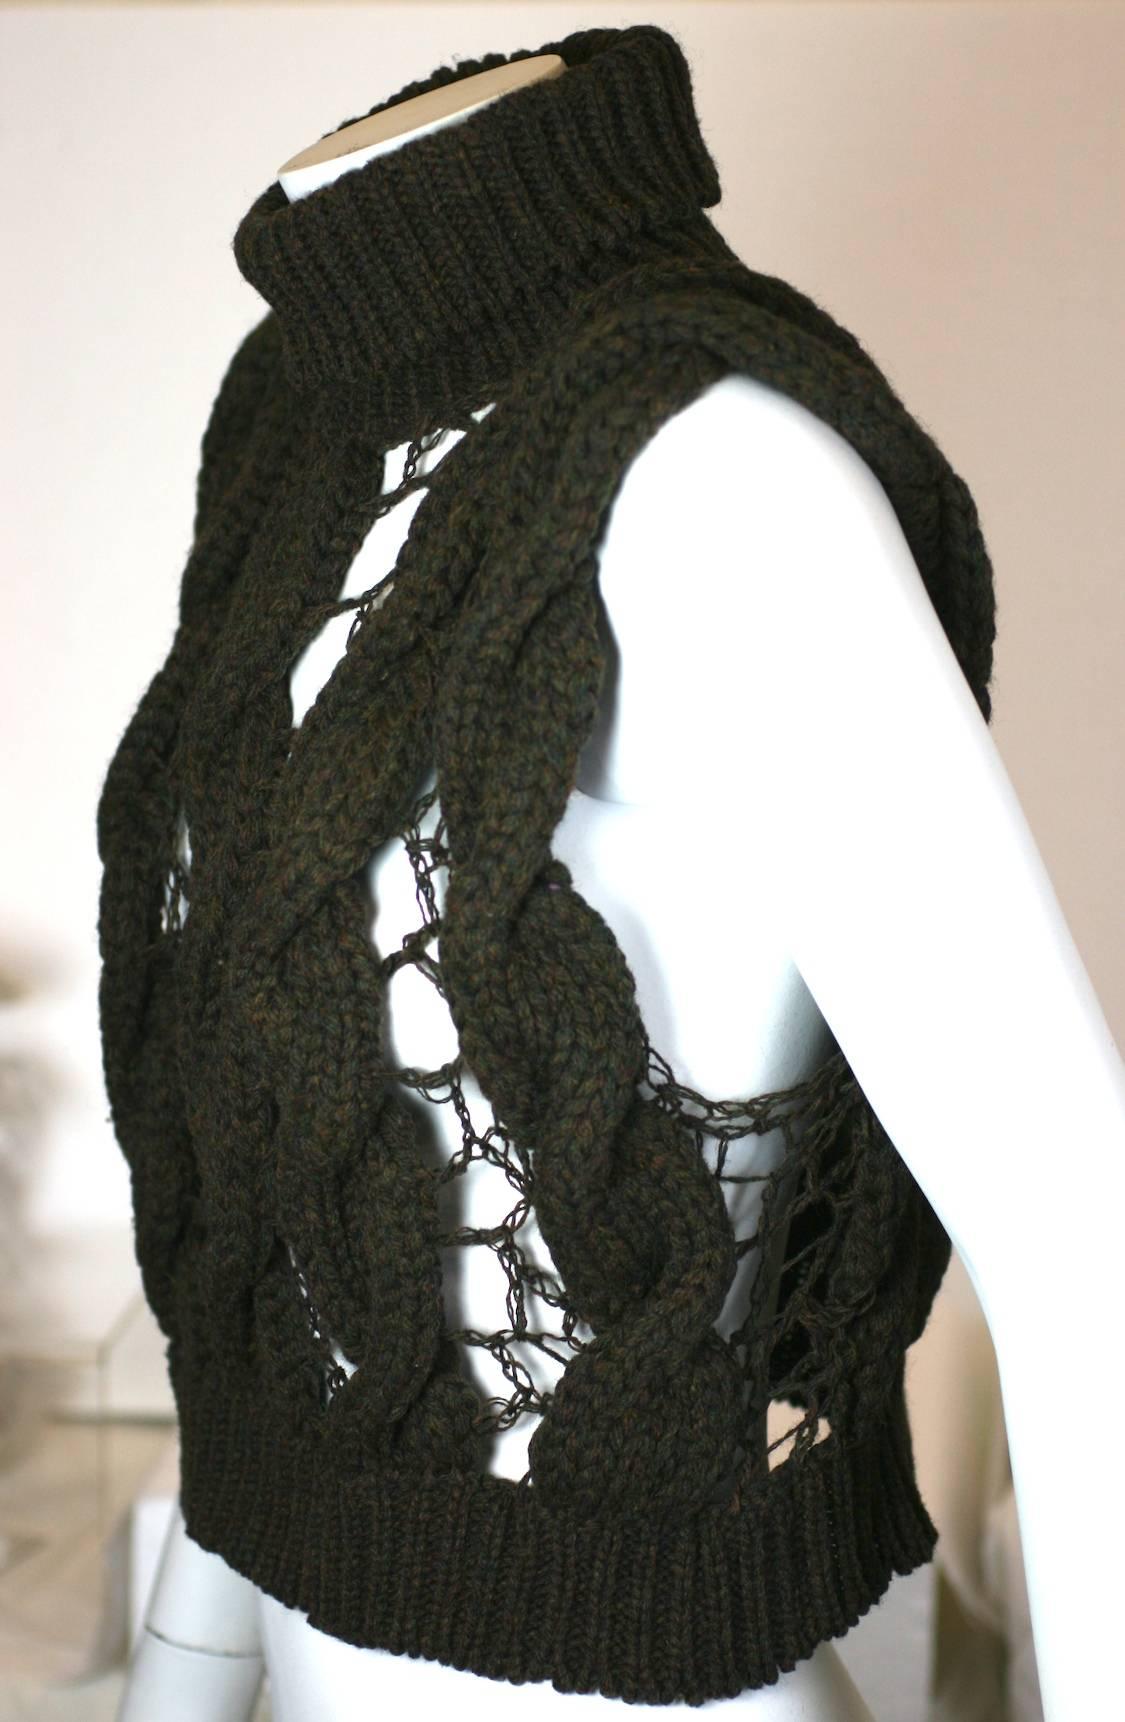 Veronique Branquinho Open Work Hand Knit Cabled Vest in tweedy brown wool. Deep turtleneck collar with a series of heavy cabled braids hand knit with delicate openwork bridges in between. 
Cool and amazing contrast of textures from this acclaimed